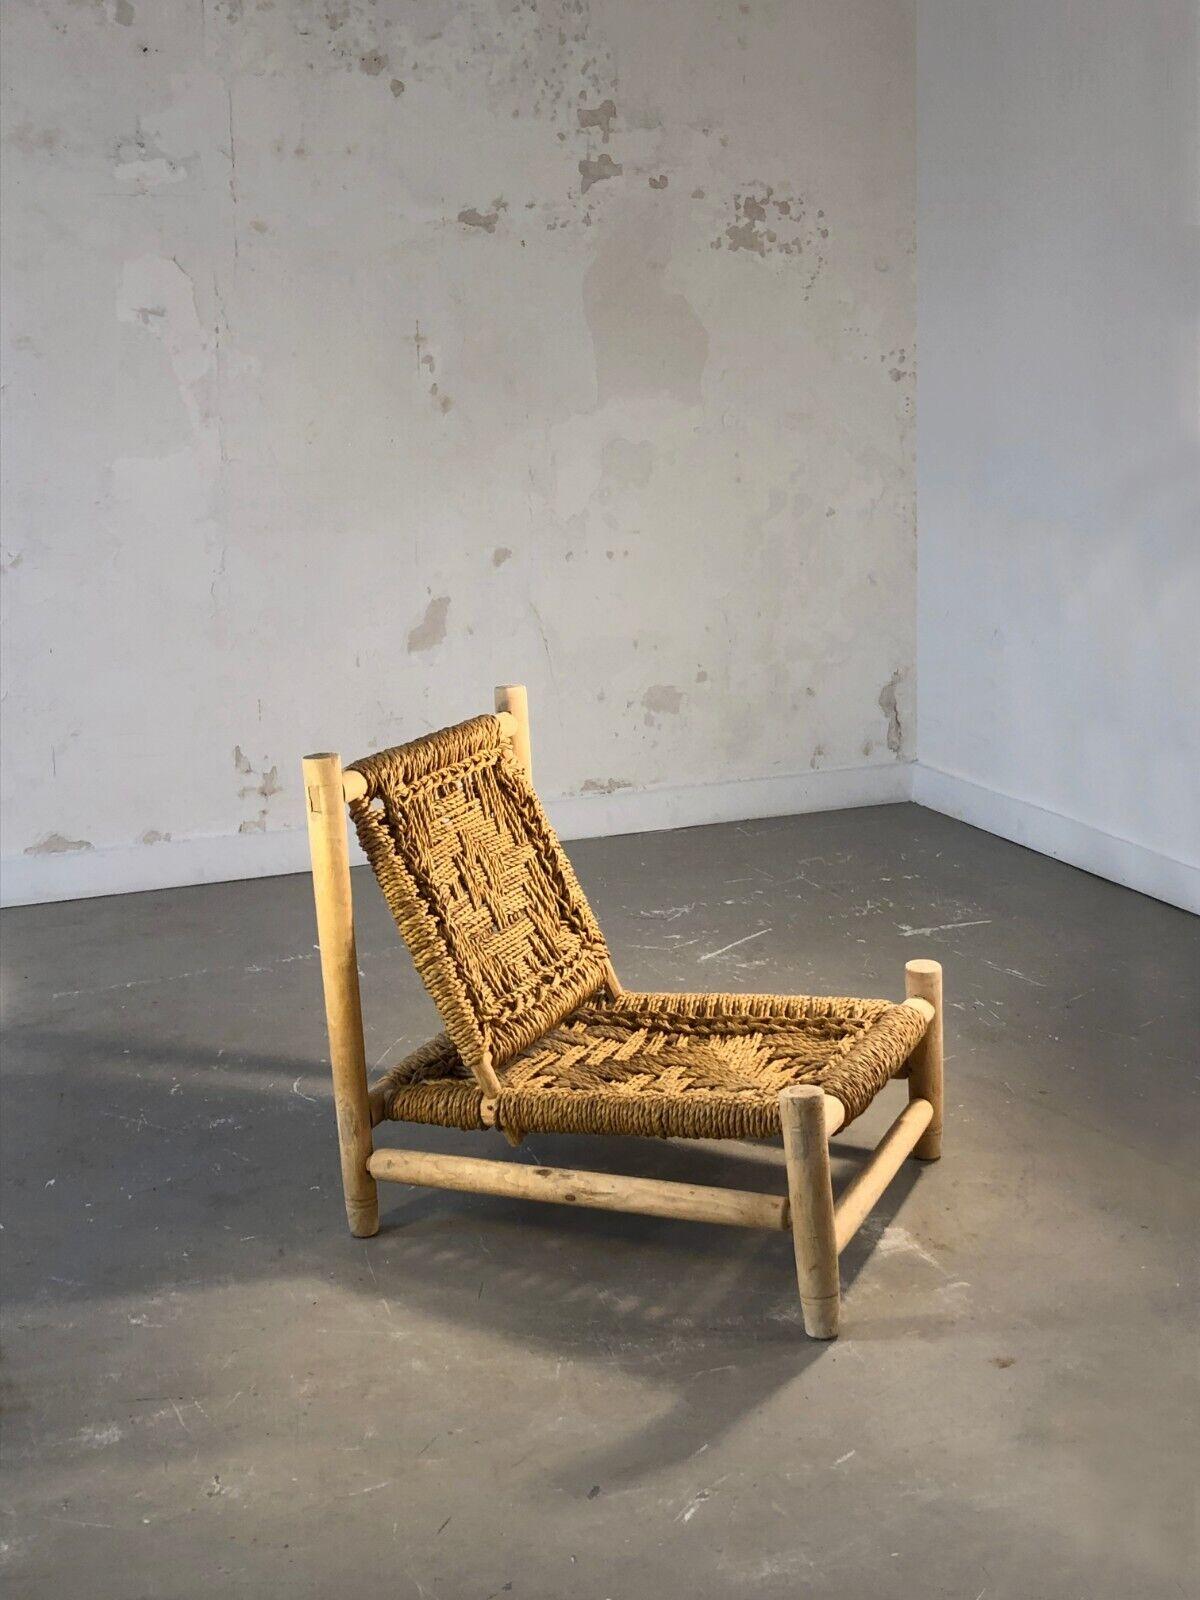 A small low armchair in clear wood and rope, Modernist, Constructivist, Brutalist, Rustic Modern, structure in cylindric light and dry wood holding a seat and a back woven in rope with a geometric motiv, by Adrien Audoux & Frida Minnet aka